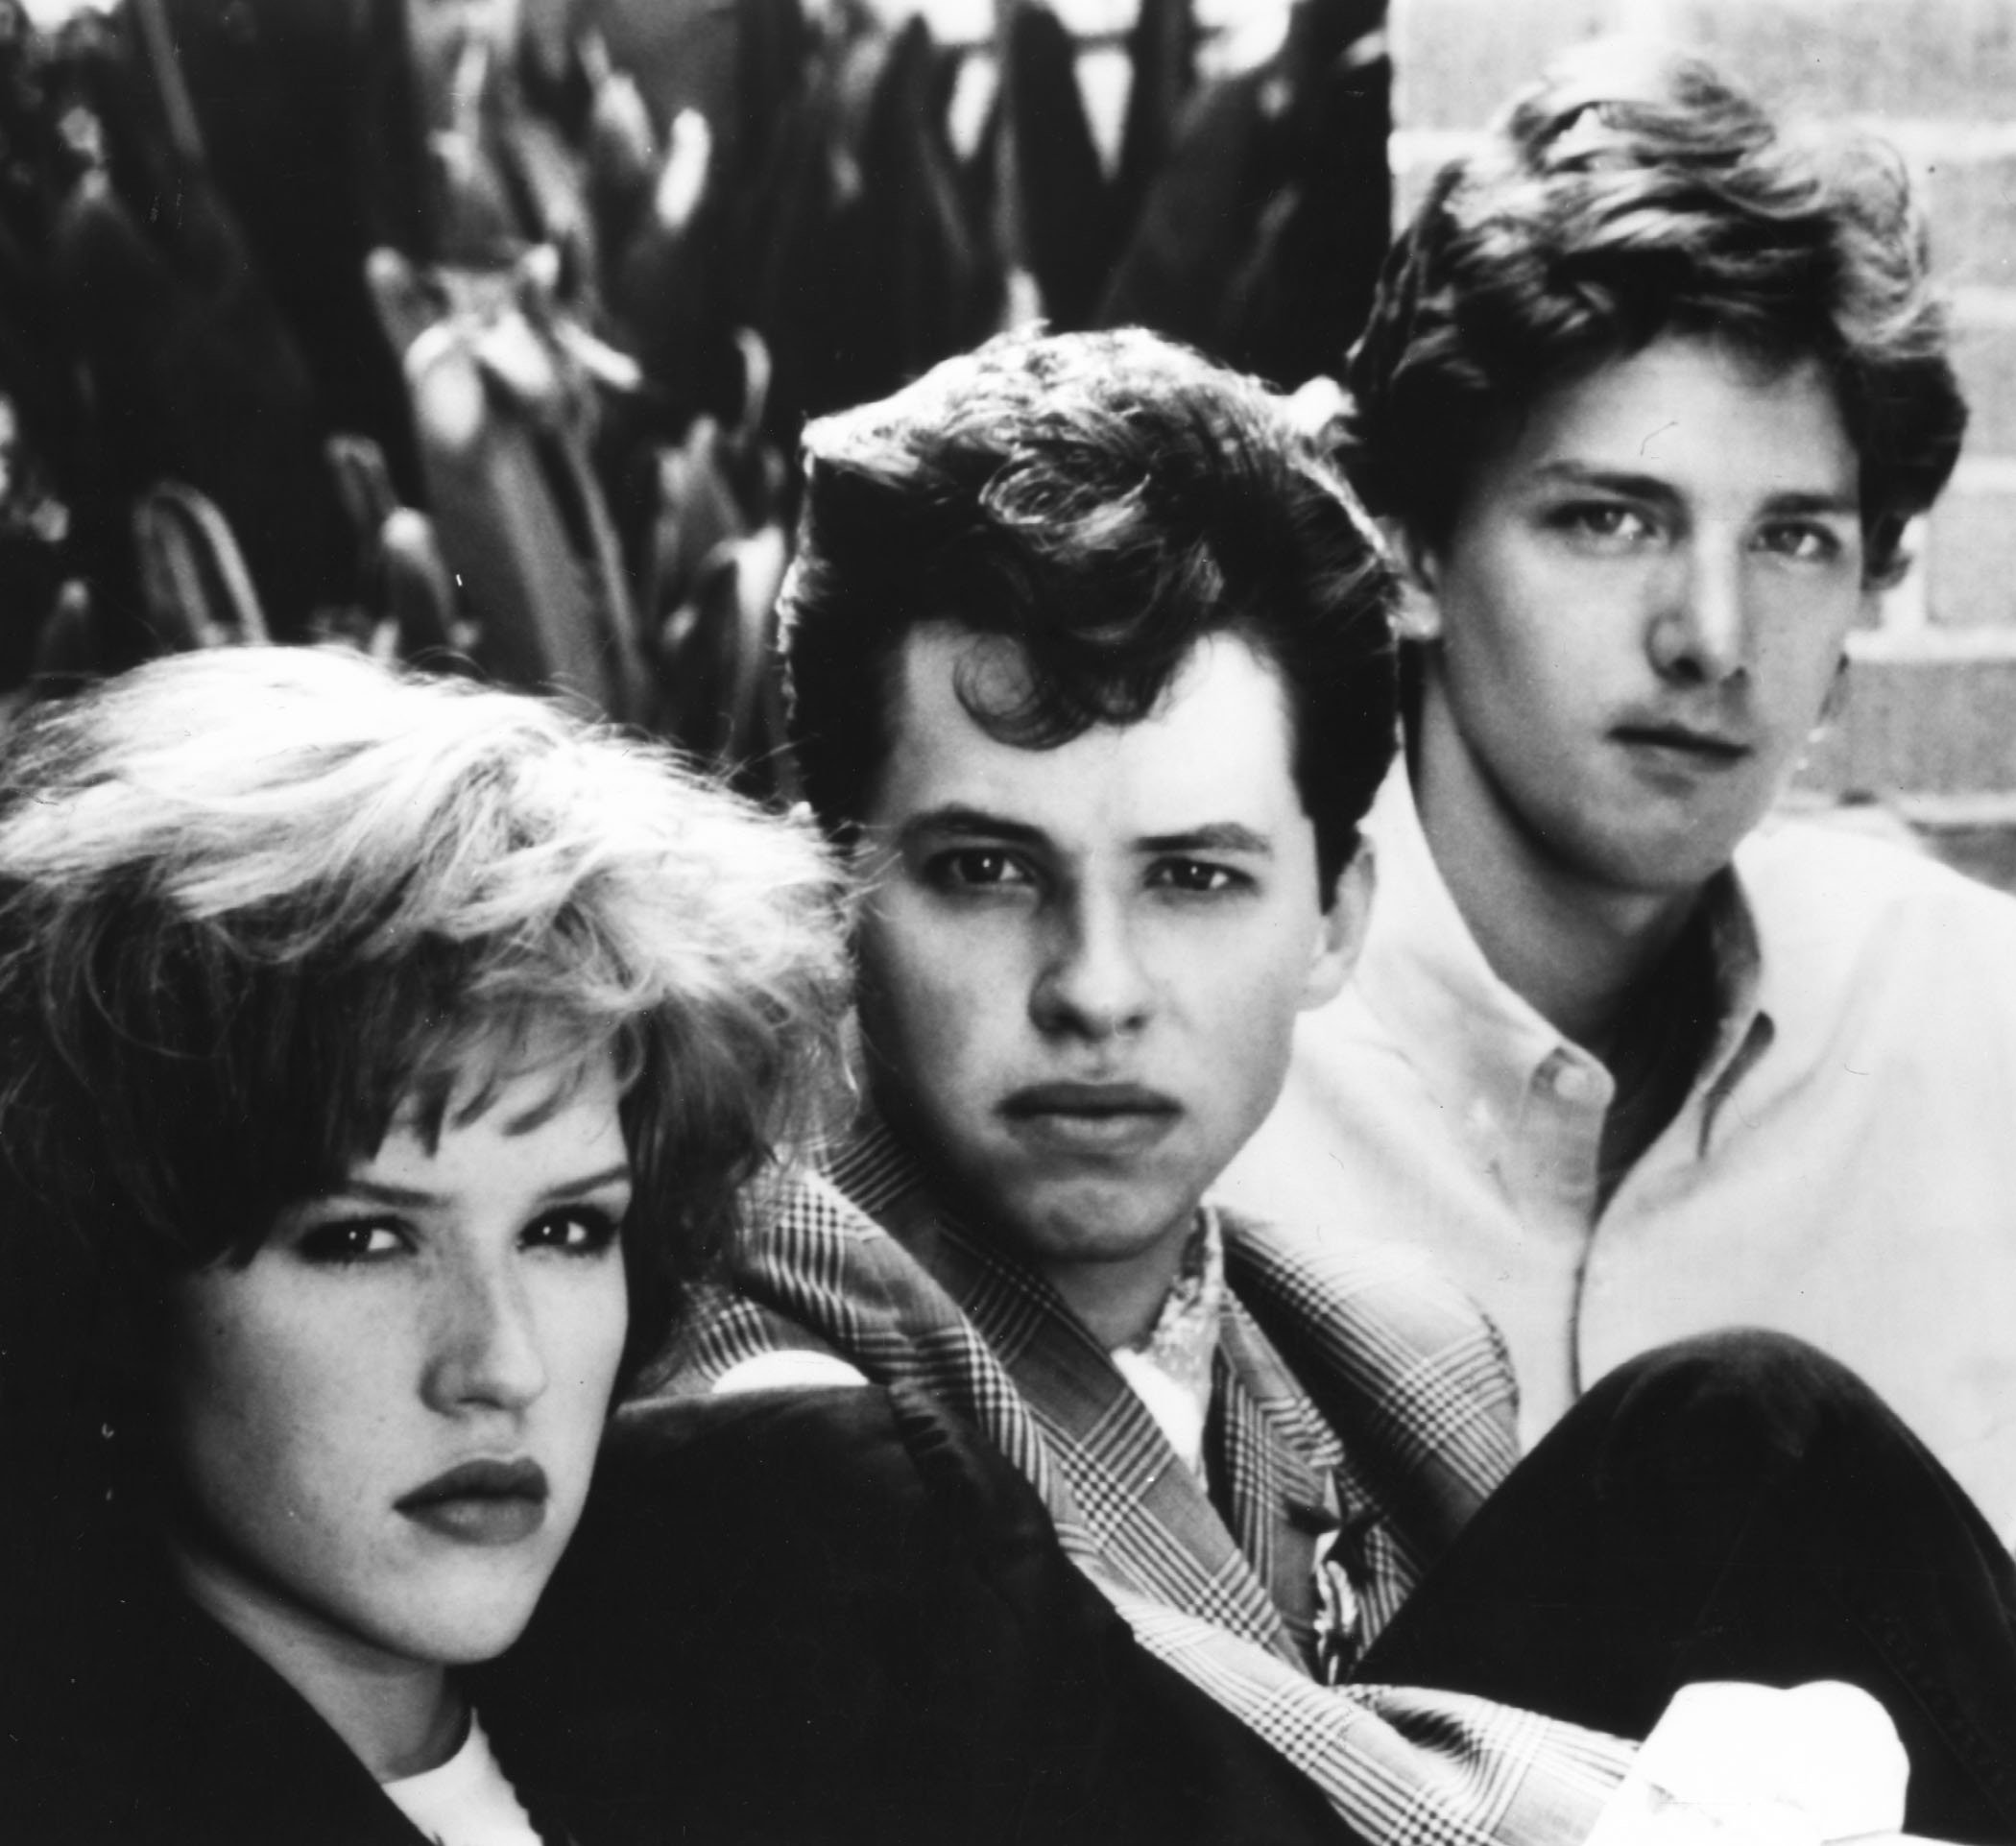 Here's where you can watch “Pretty in Pink” on a big screen for free ...